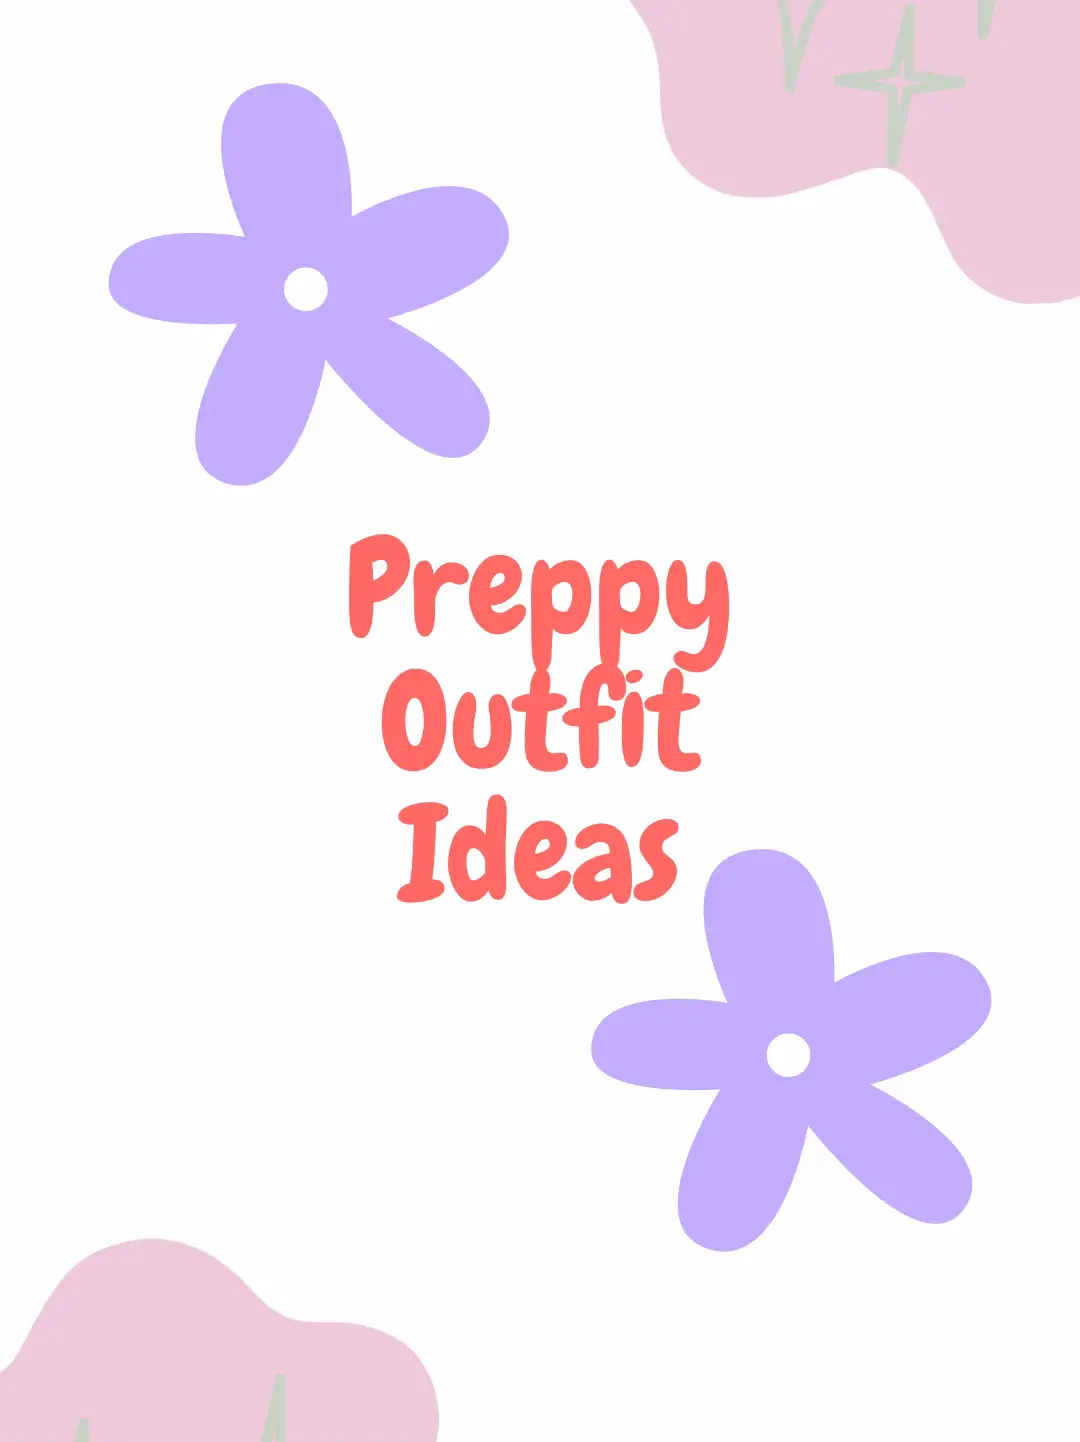 preppy lulu fits 🌴💗⚡️  Lululemon outfits, Cute preppy outfits